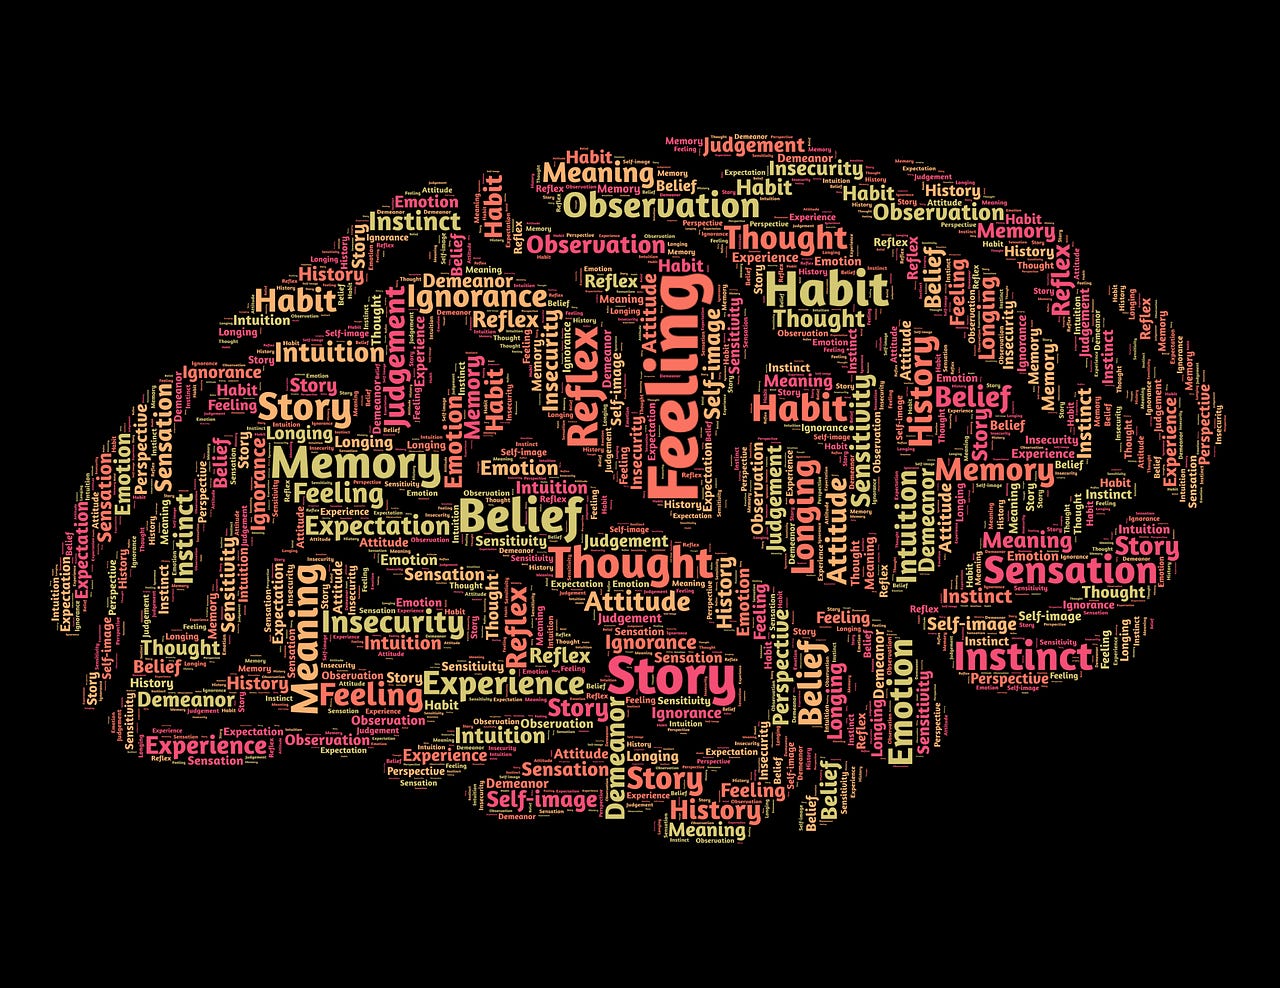 A picture of a brain with multicolored words overlayed throughout: demeanor, ignorance, reflect, intuition, story, longing, memory, feeling, expectation, reflex, thought, attitude, experience, perspective, habit, emotion, judgment, instinct, self-image, observation, sensitivity, demeanor